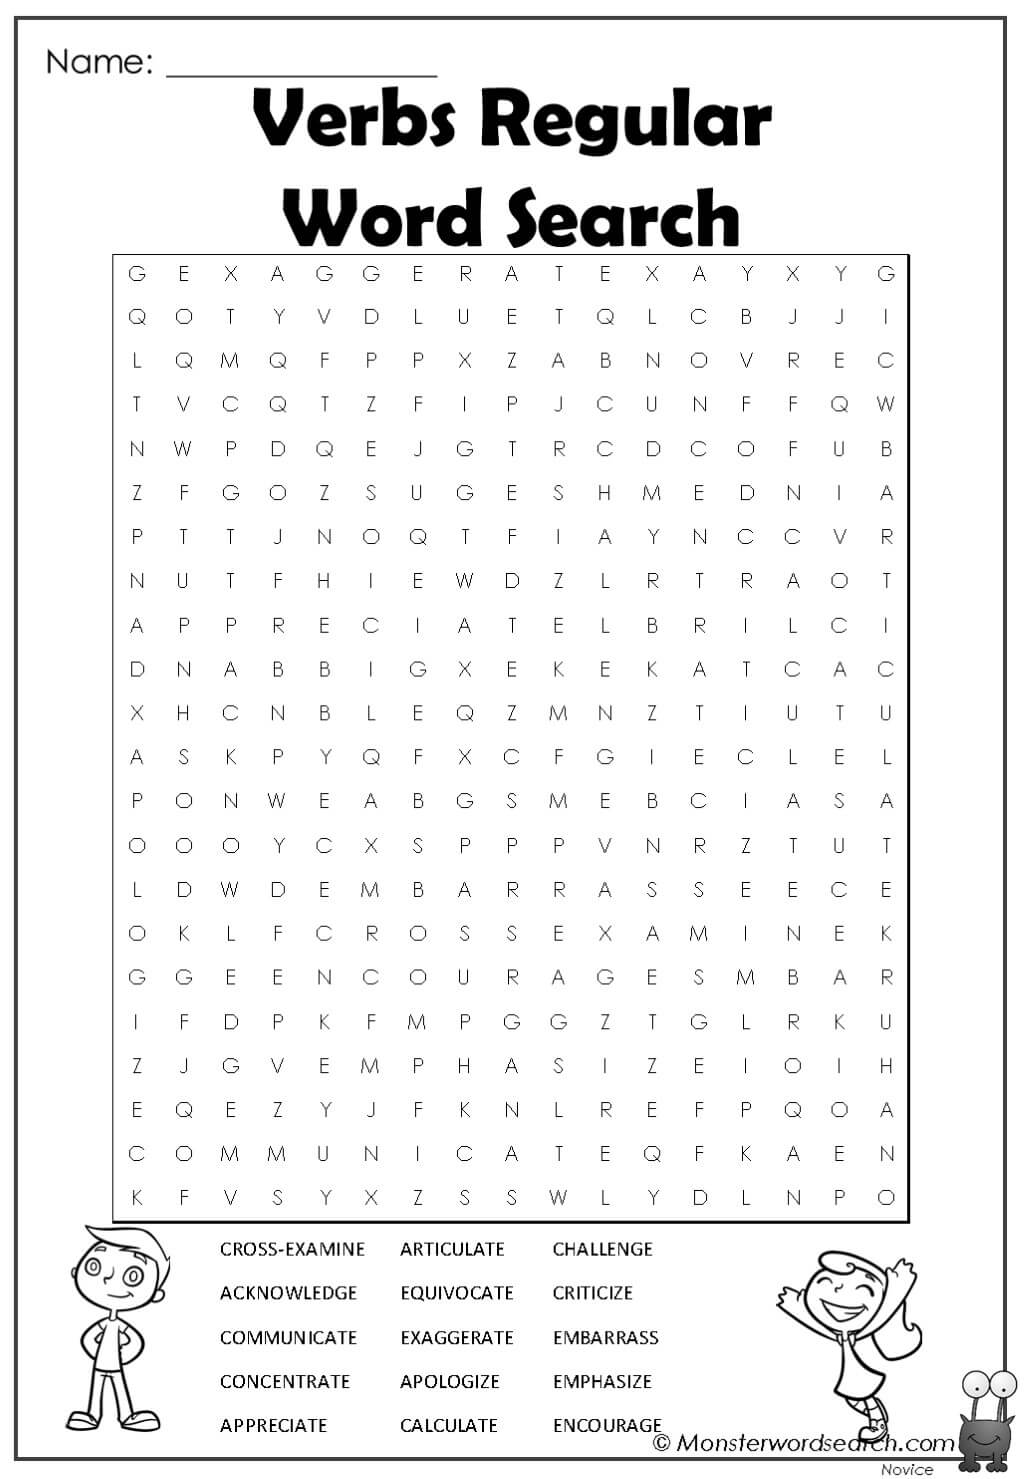 Verbs Regular Word Search- Monster Word Search